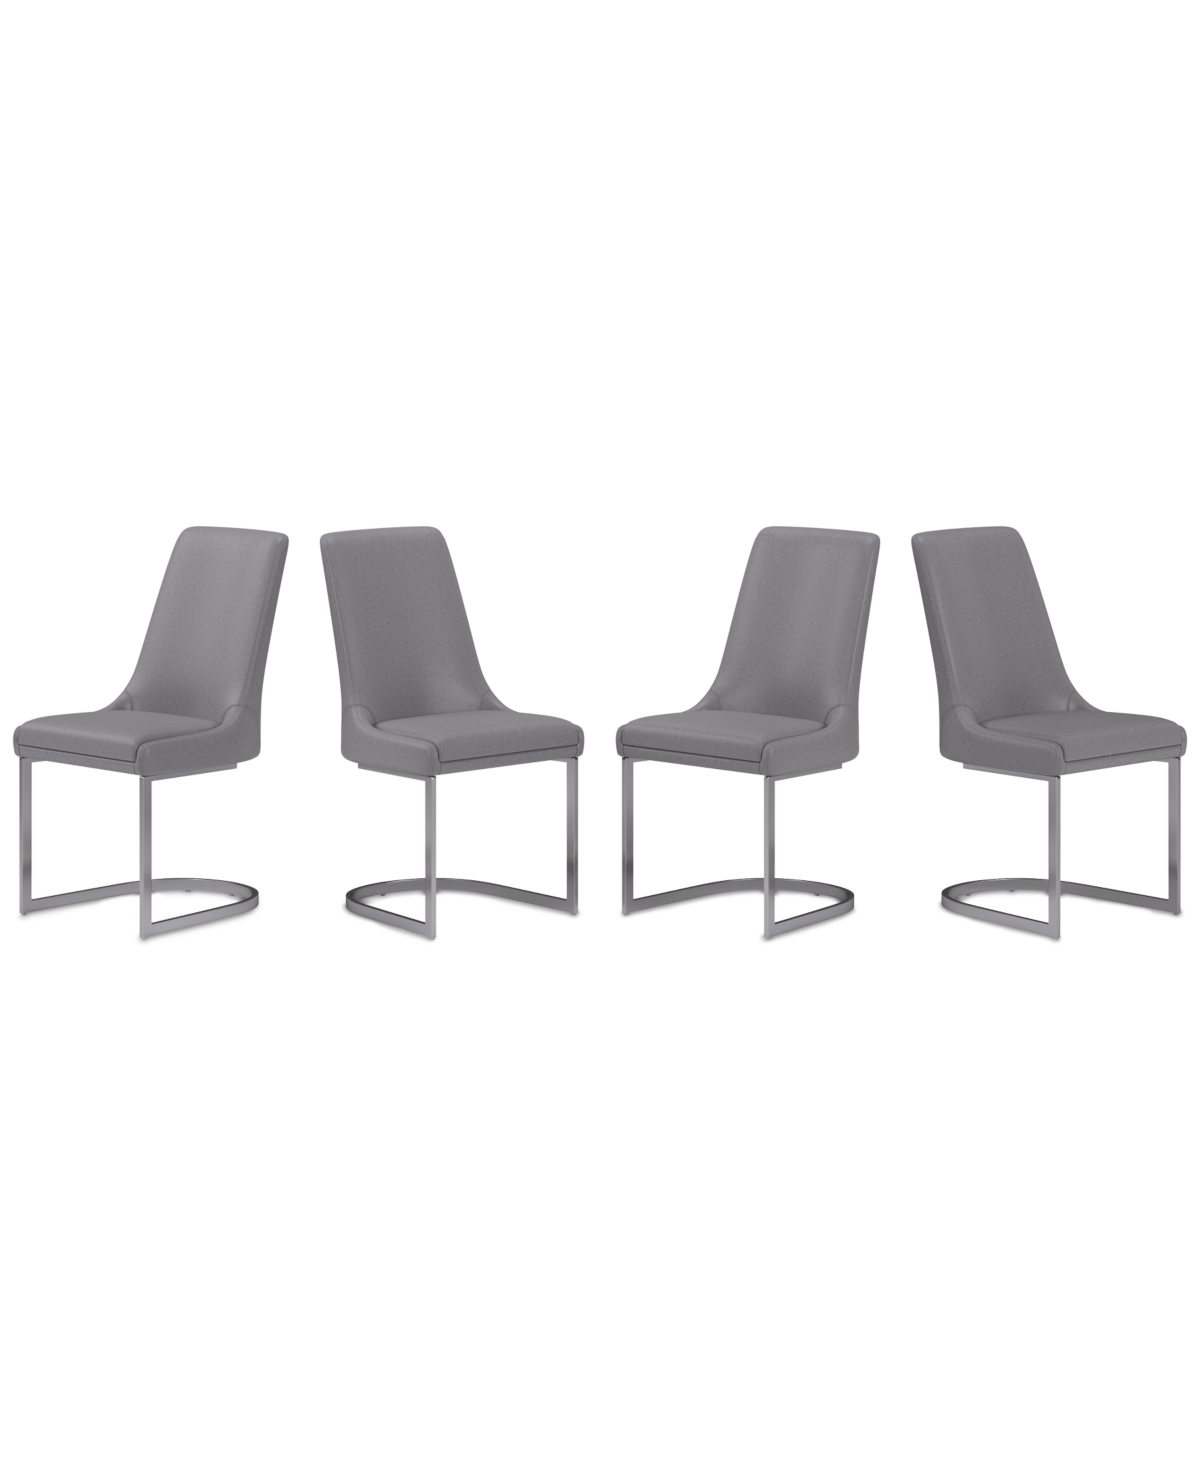 Macy's Tivie Dining Chair 4pc Set In Charcoal